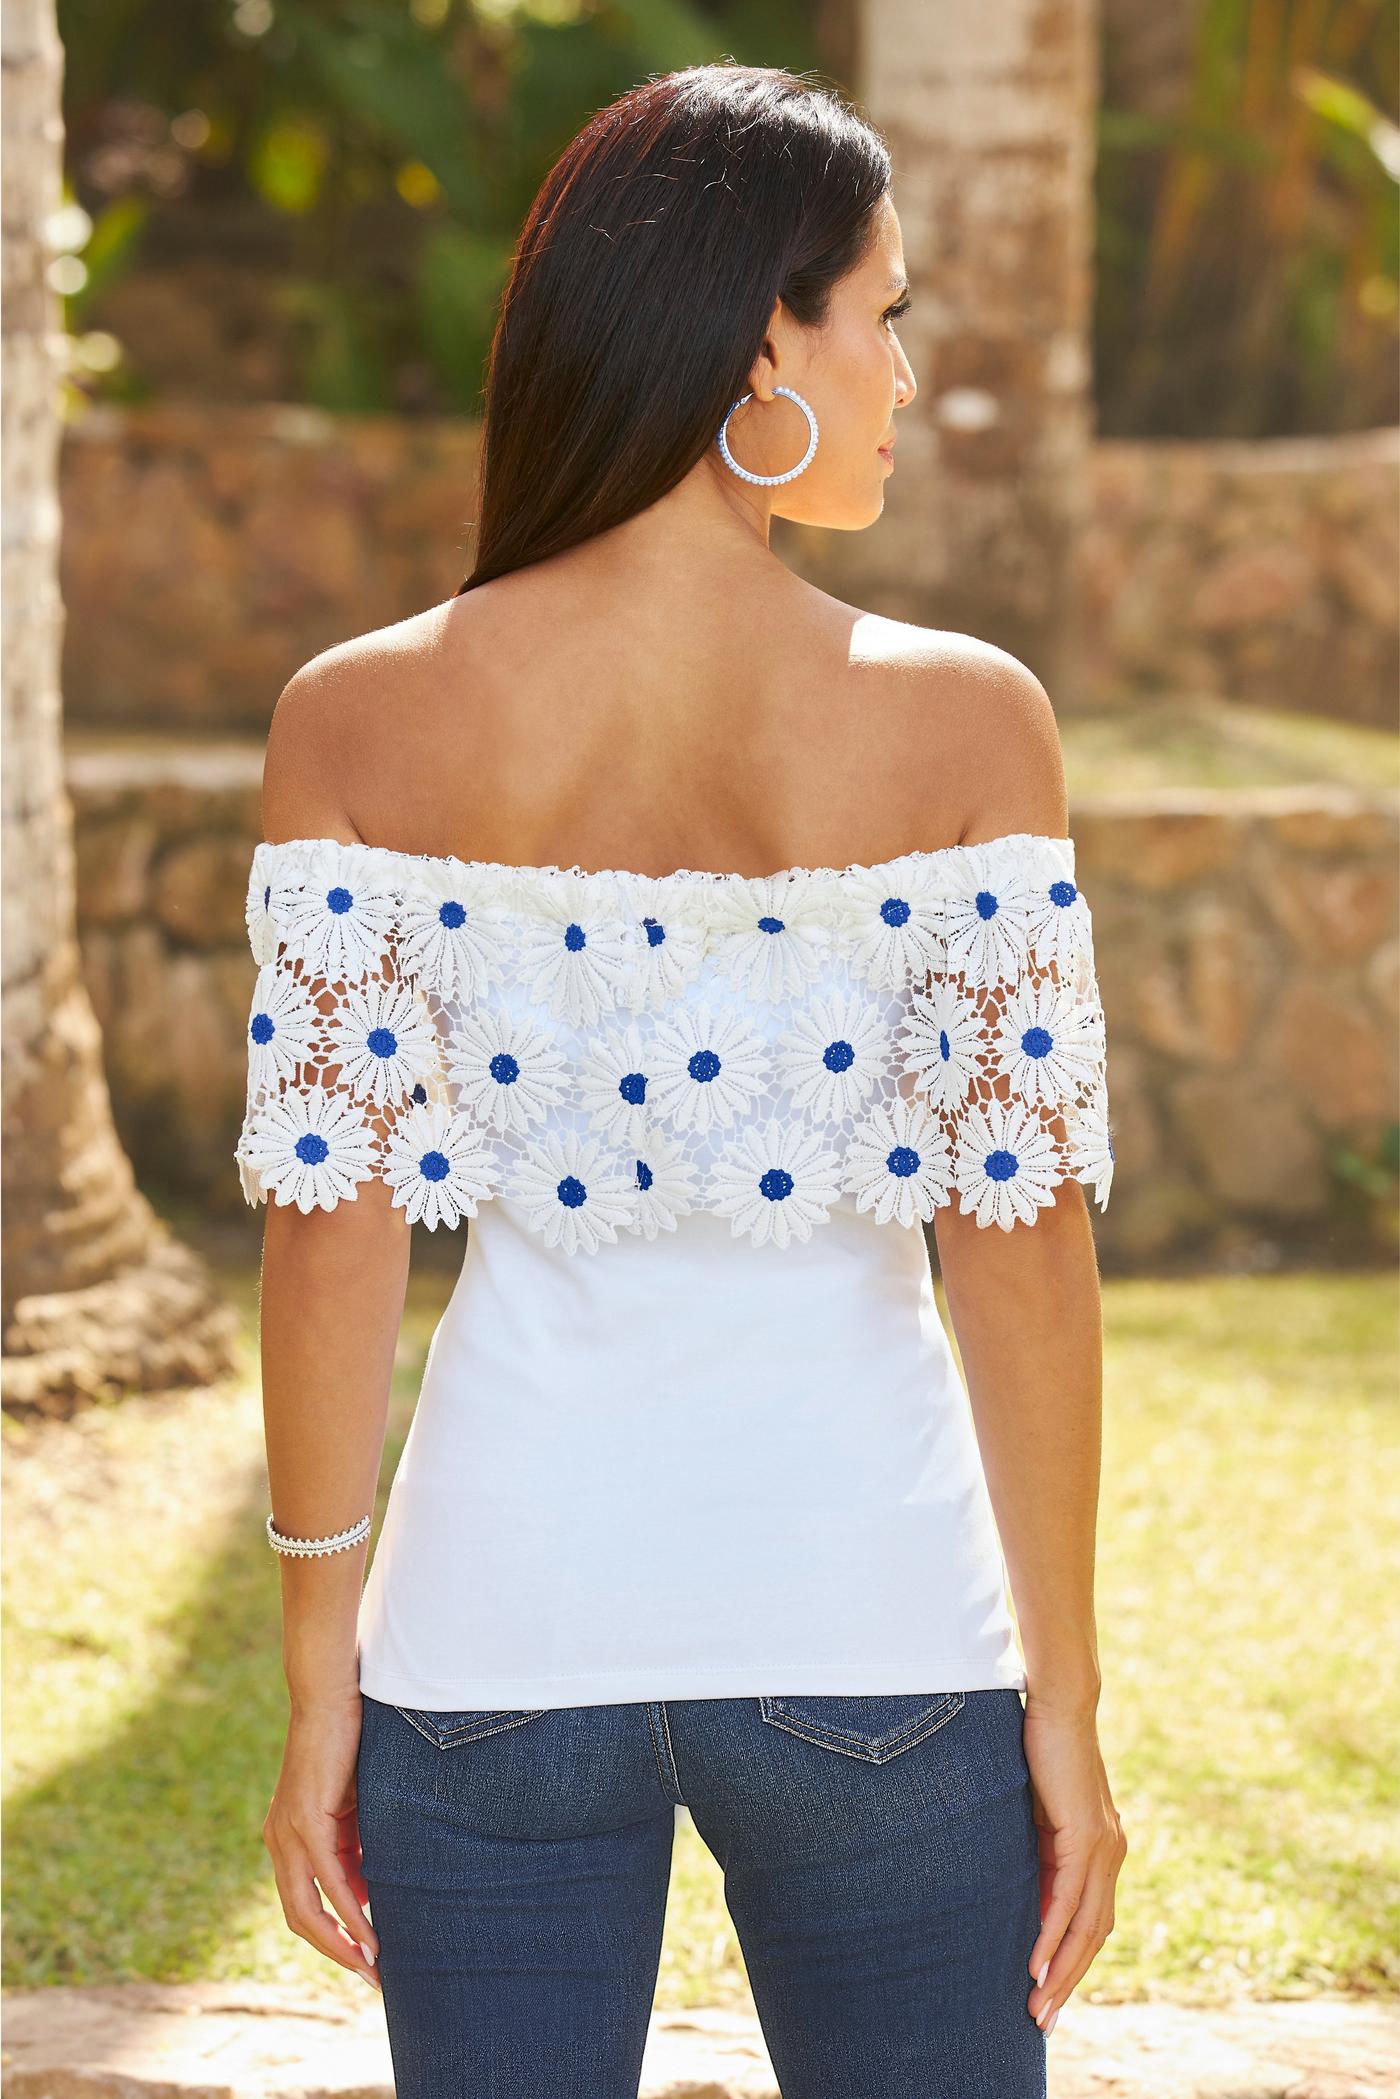 Daisy Lace Off The Shoulder Knit Top - White/Blue